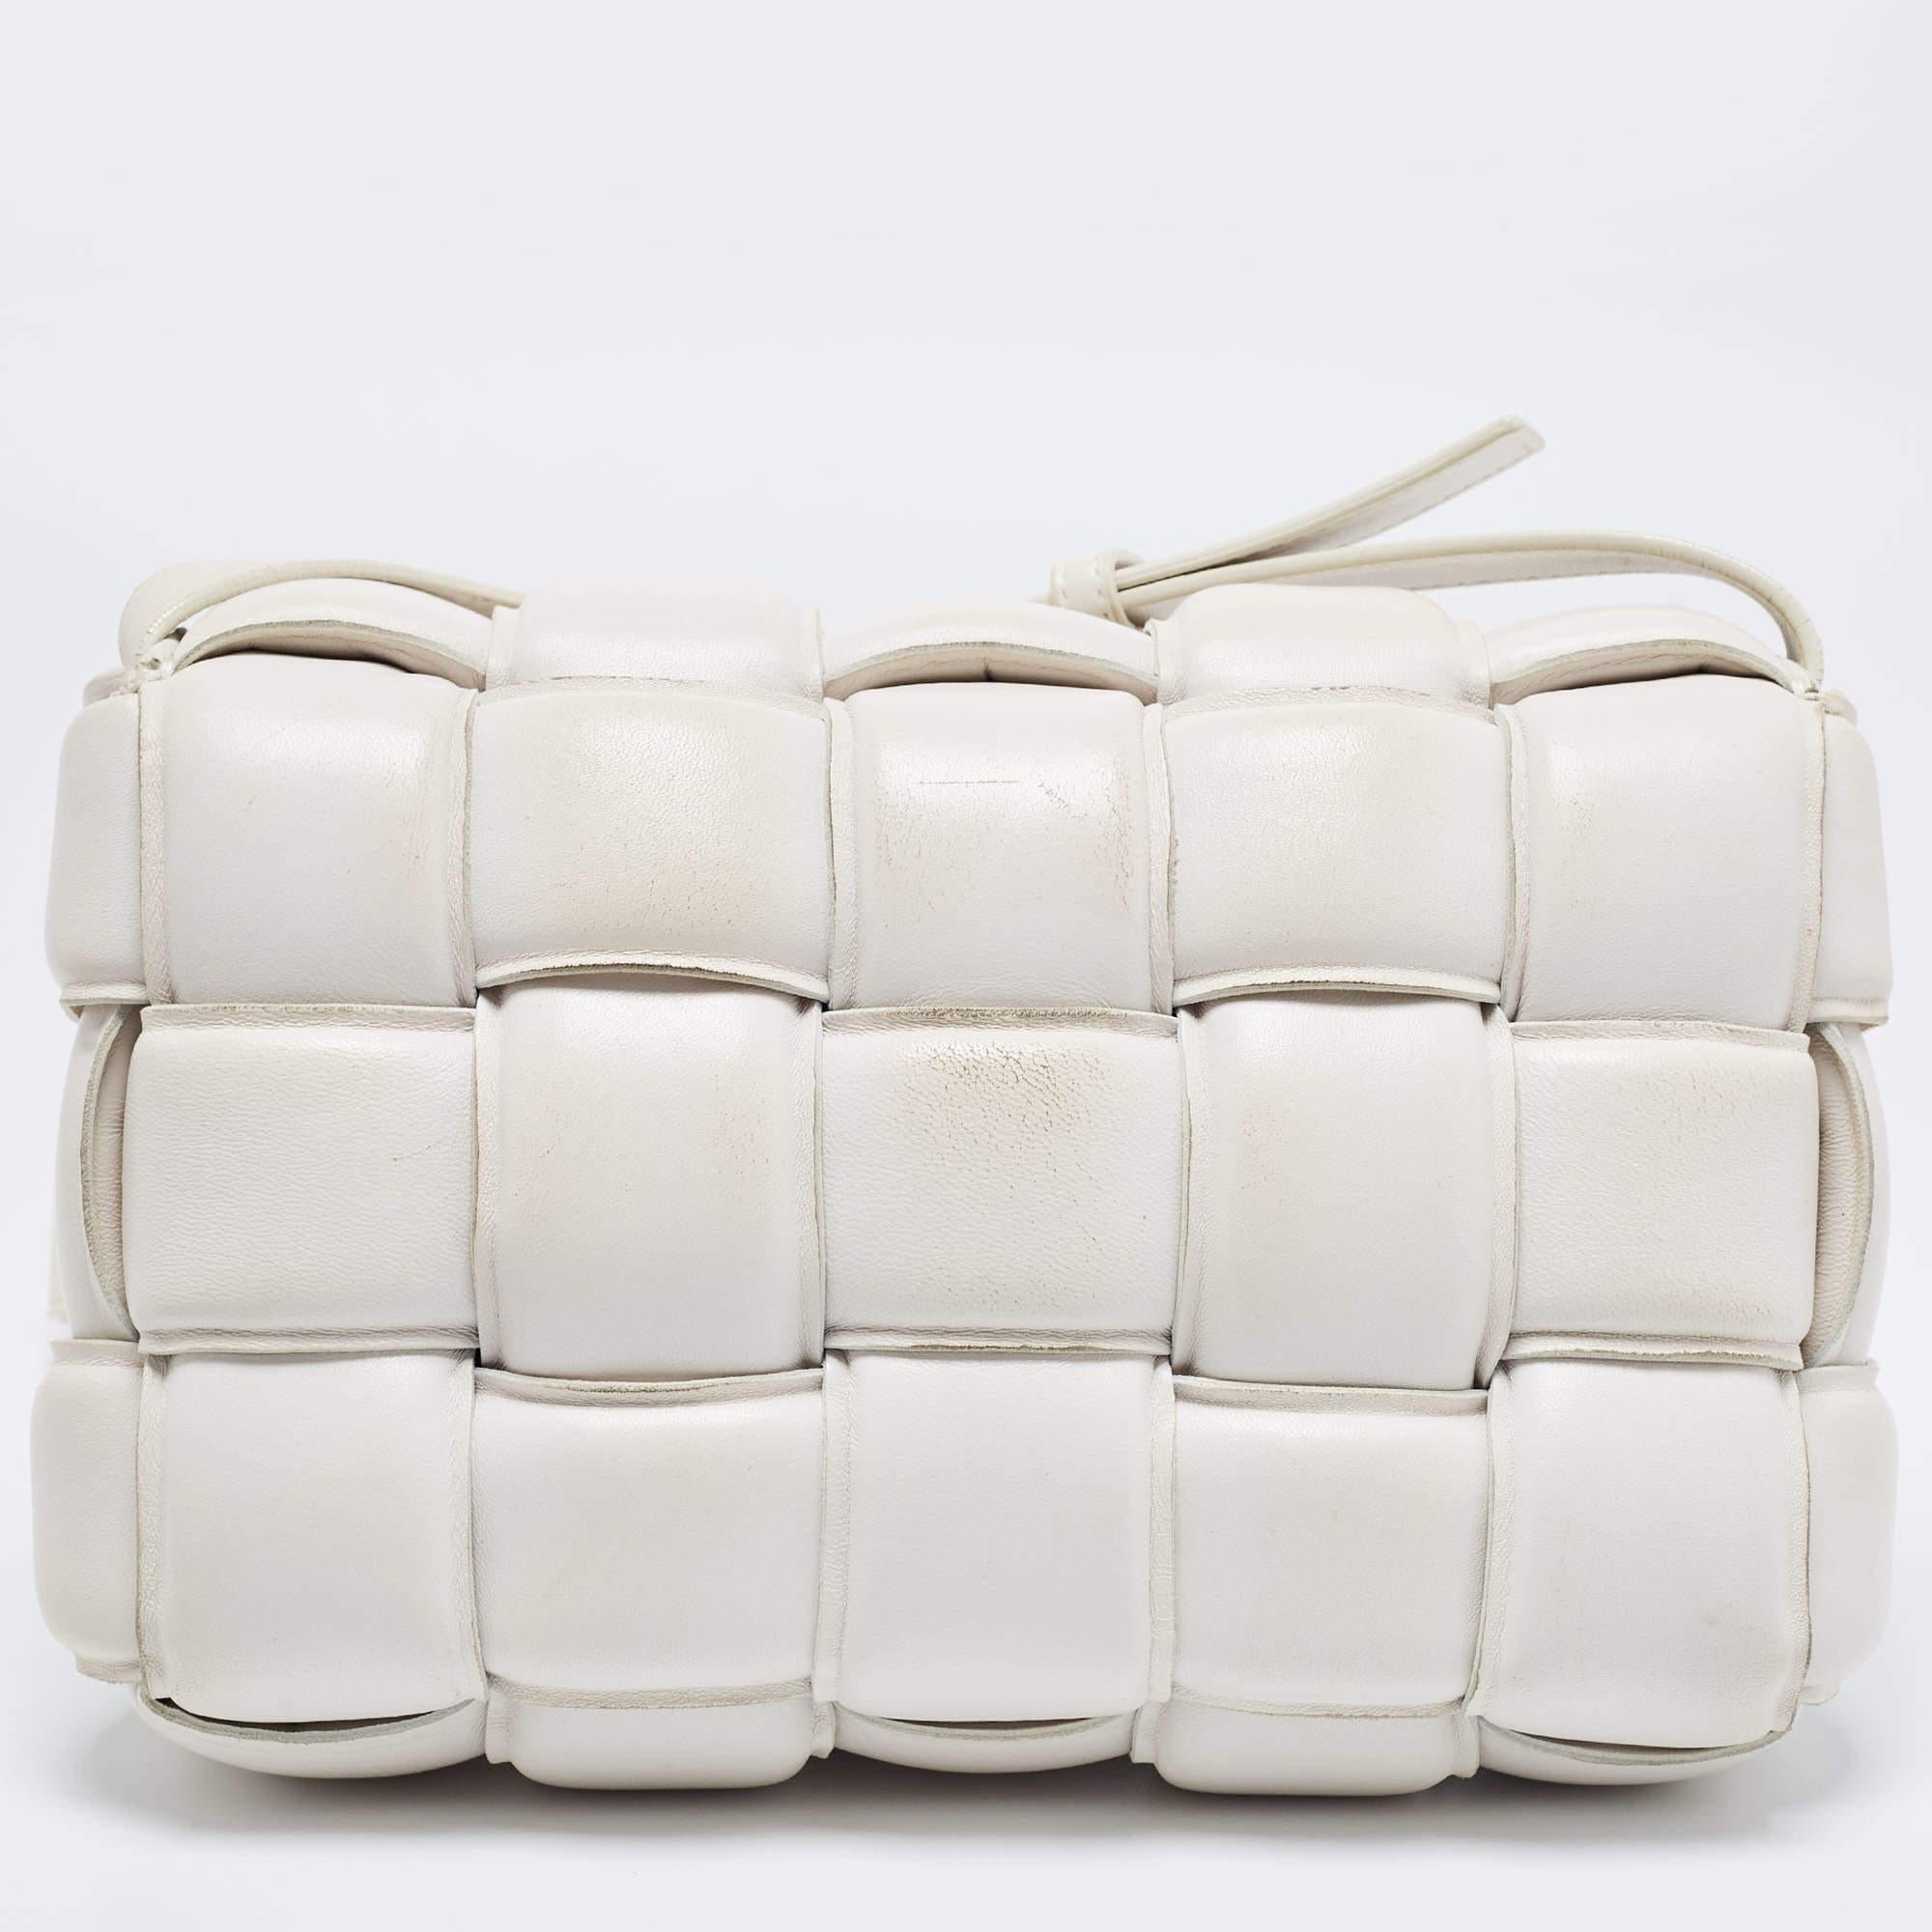 The current bag on many fashionistas' minds is this Cassette bag from the house of Bottega Veneta. We have here the one in white leather, flaunting a padded maxi weave and a shoulder strap. The insides are sized to fit your phone and other little